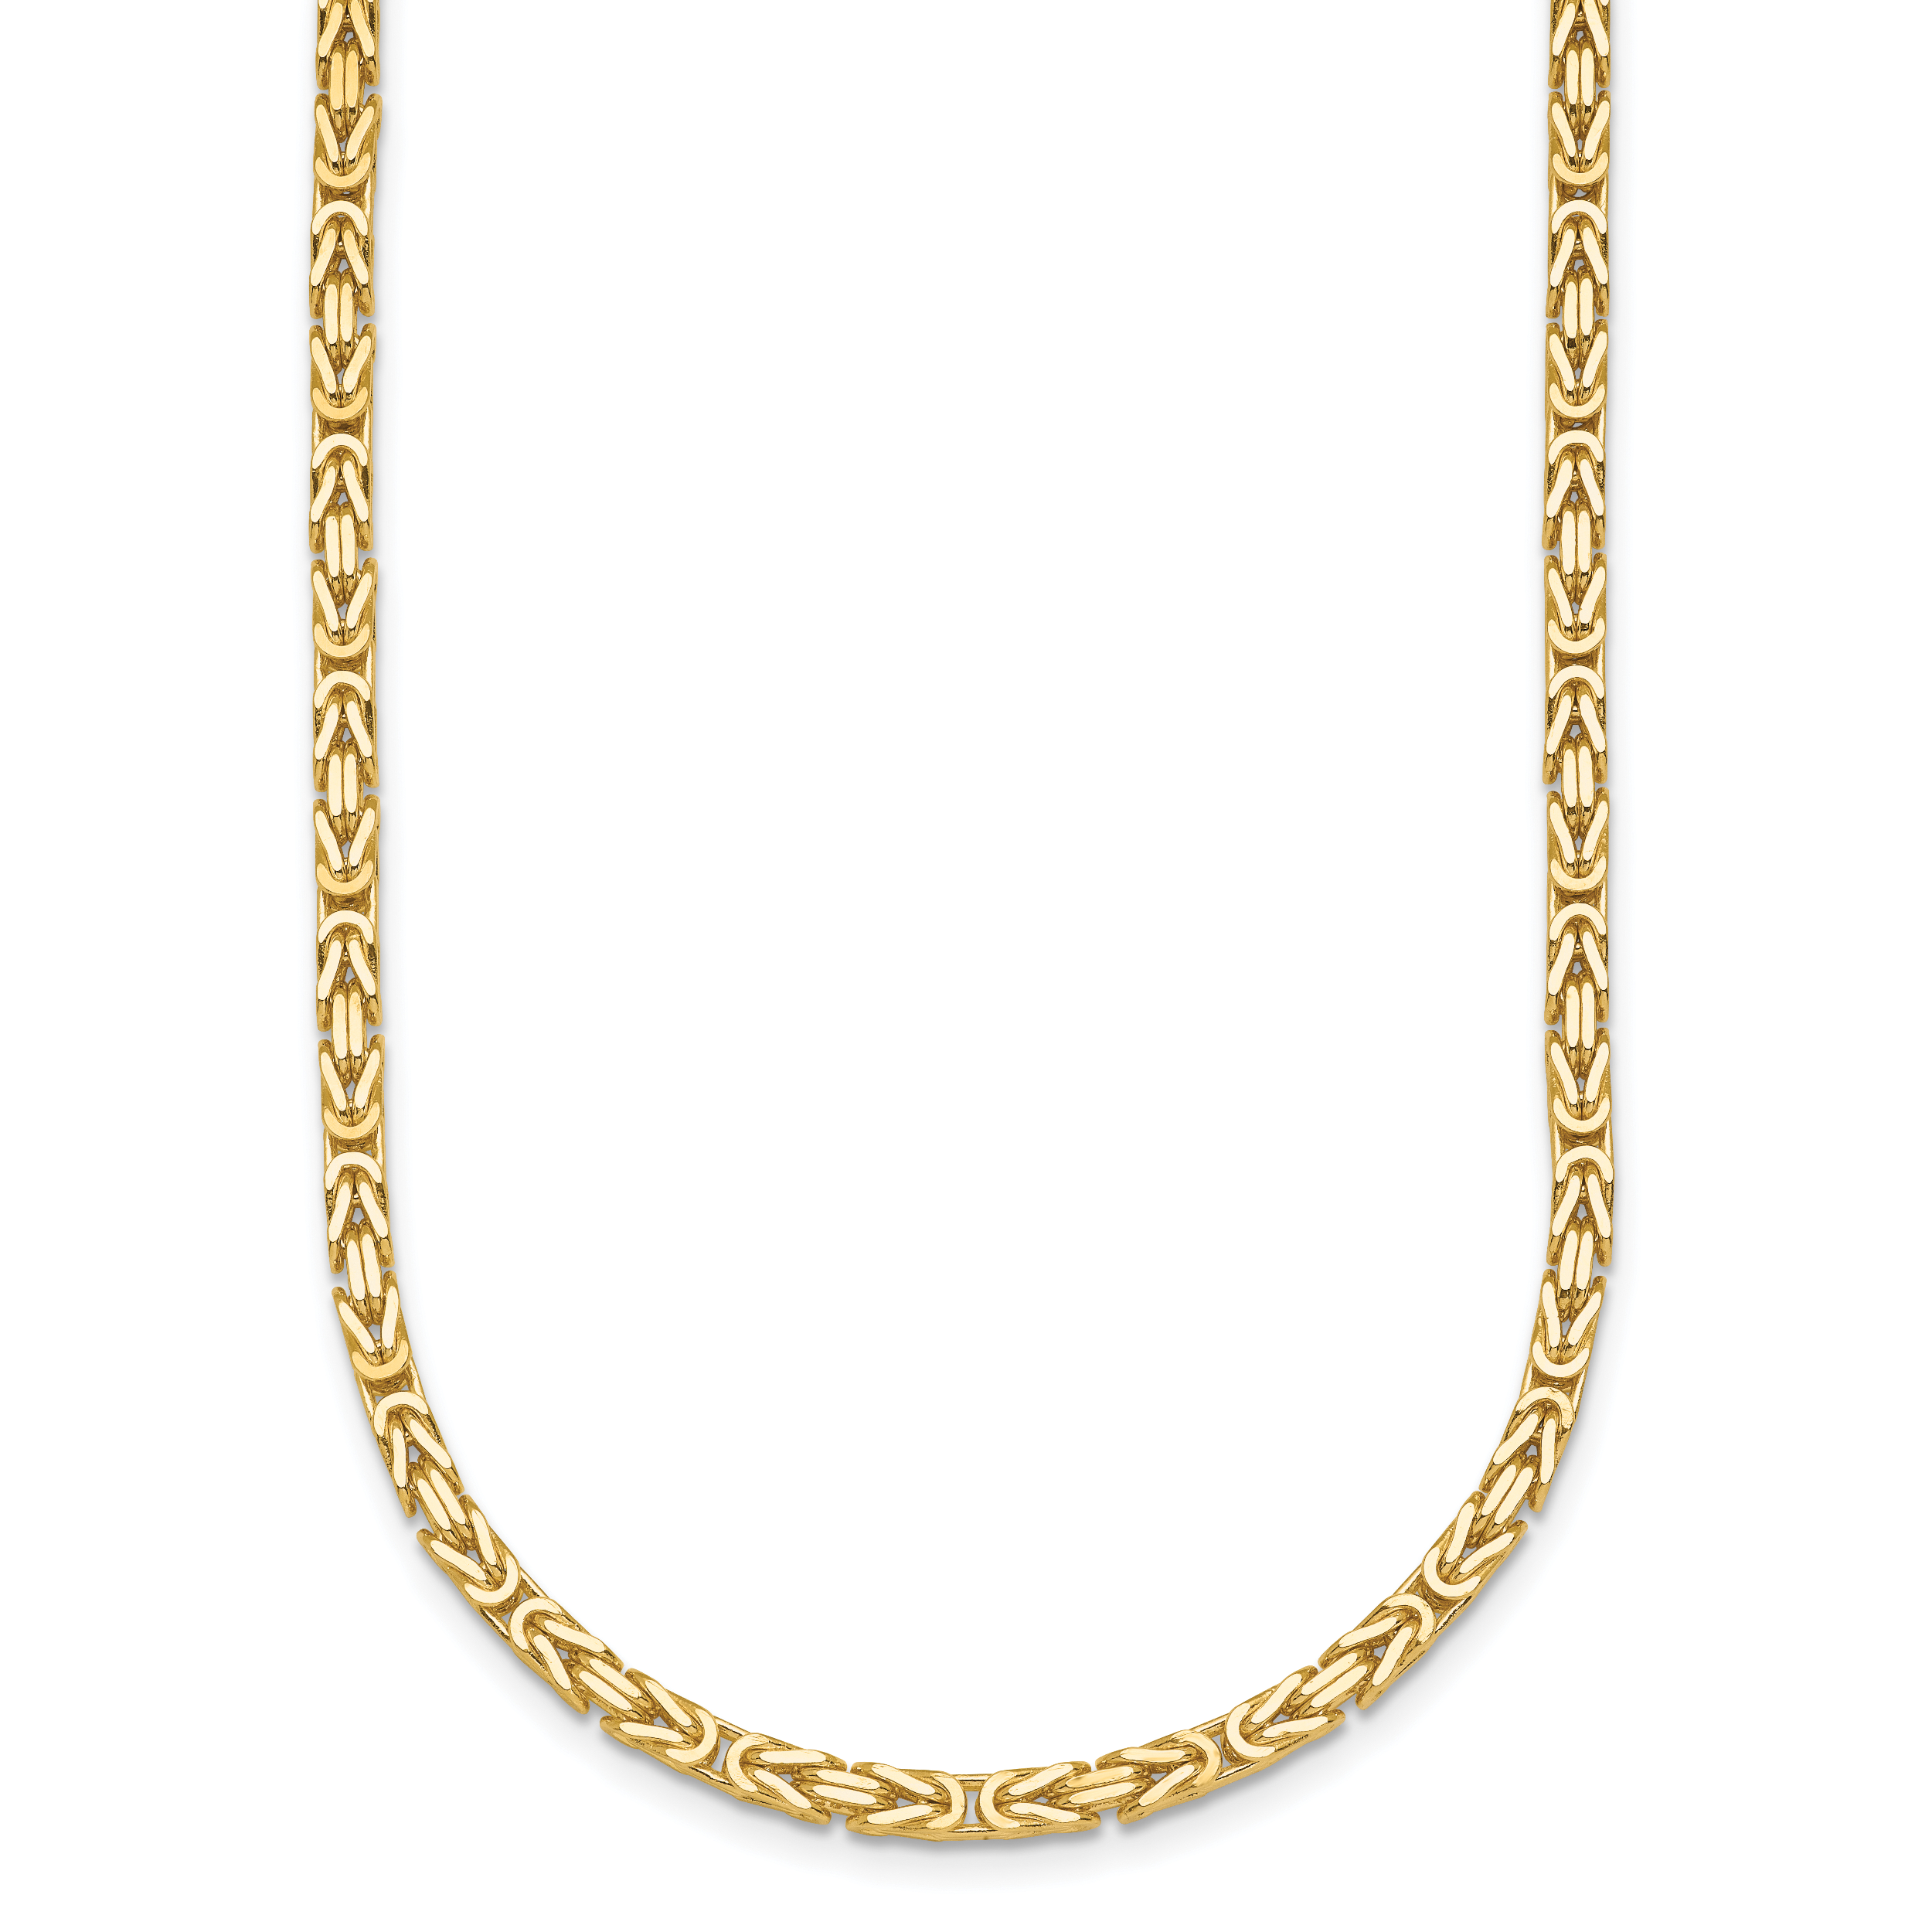 Herco 14K Polished 2.8mm Solid Byzantine 20 Inch Chain - Quality Gold